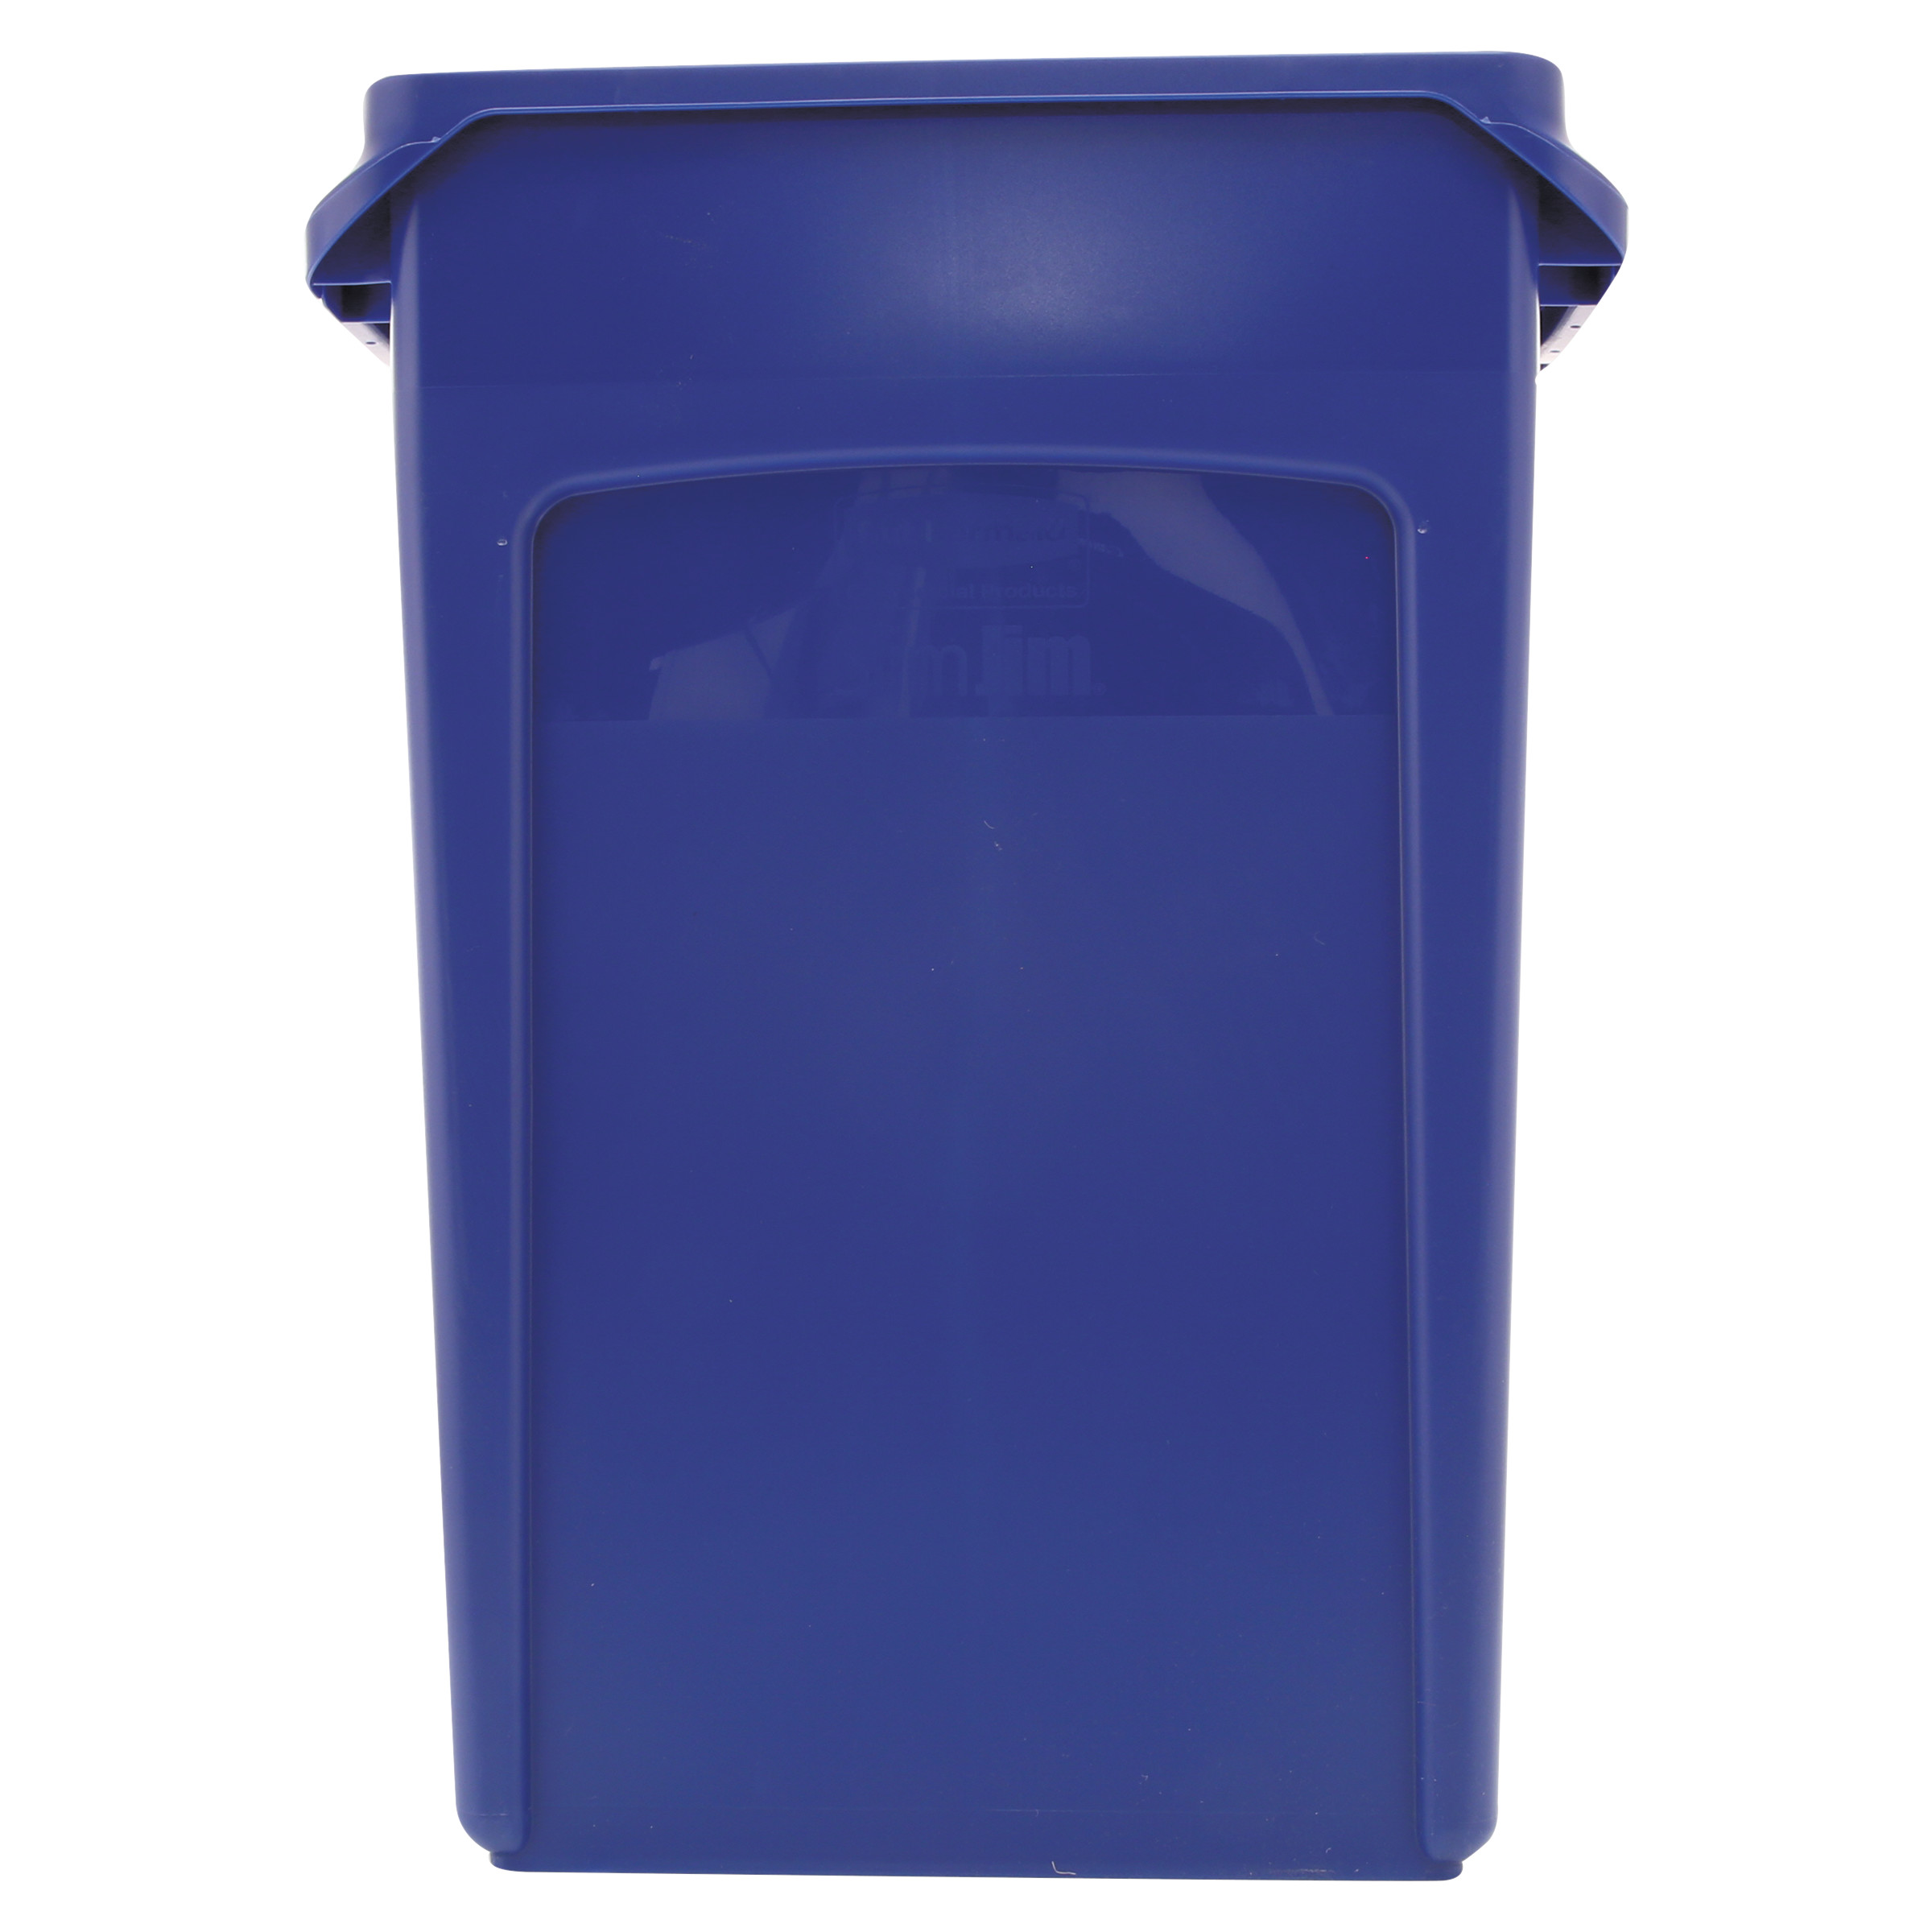 Rubbermaid Commercial Products FG354007BLUE Venting Slim Jim Recycling Waste Container, Blue - image 4 of 4